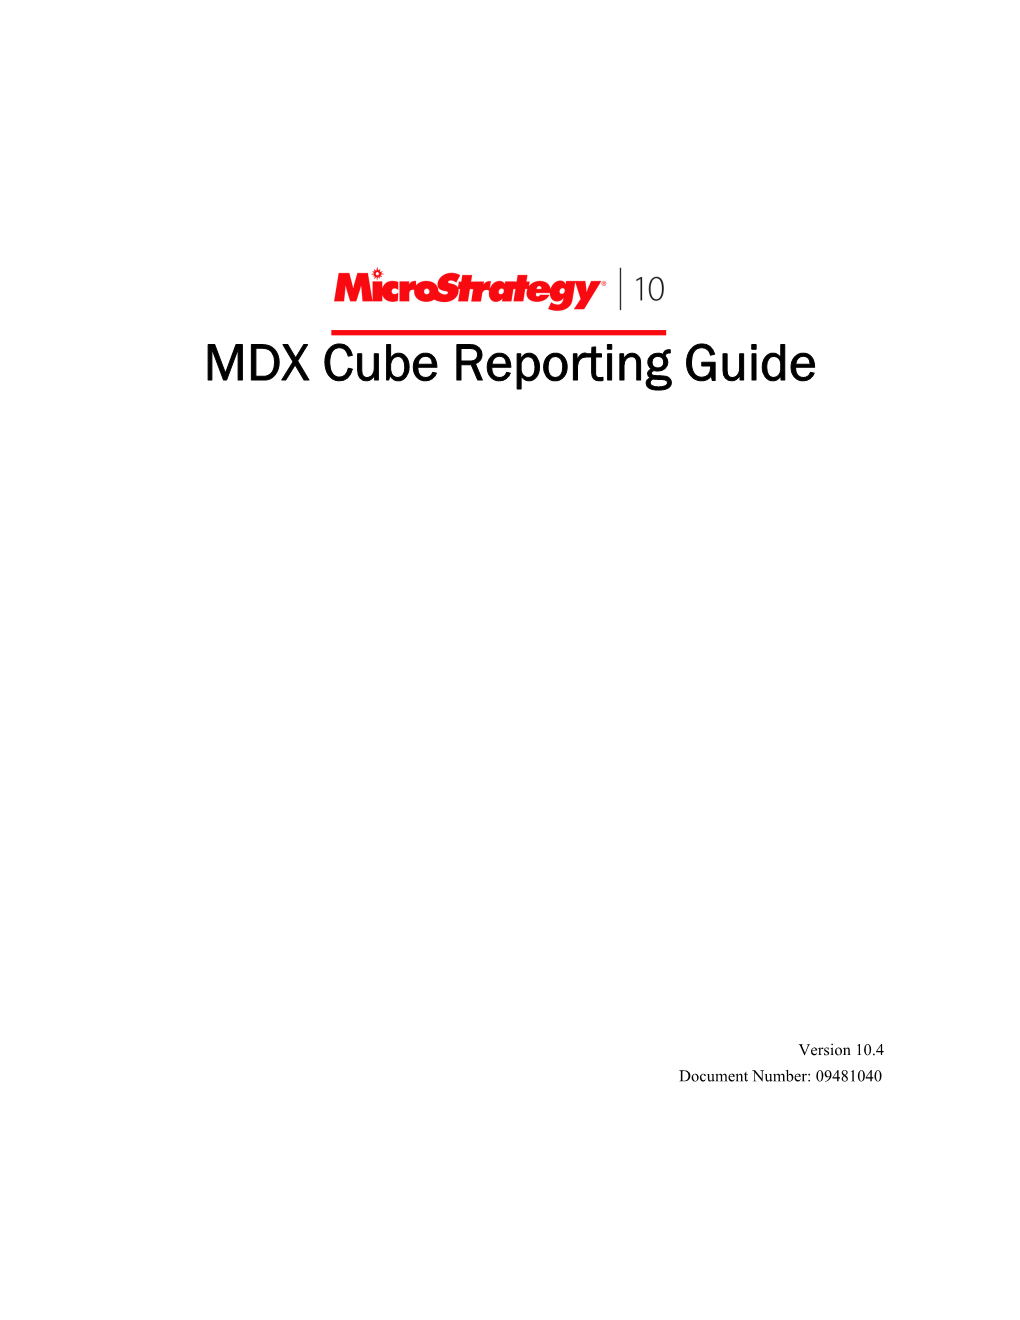 Microstrategy MDX Cube Reporting Guide Provides Comprehensive Information on Integrating Microstrategy with Multidimensional Expression (MDX) Cube Sources